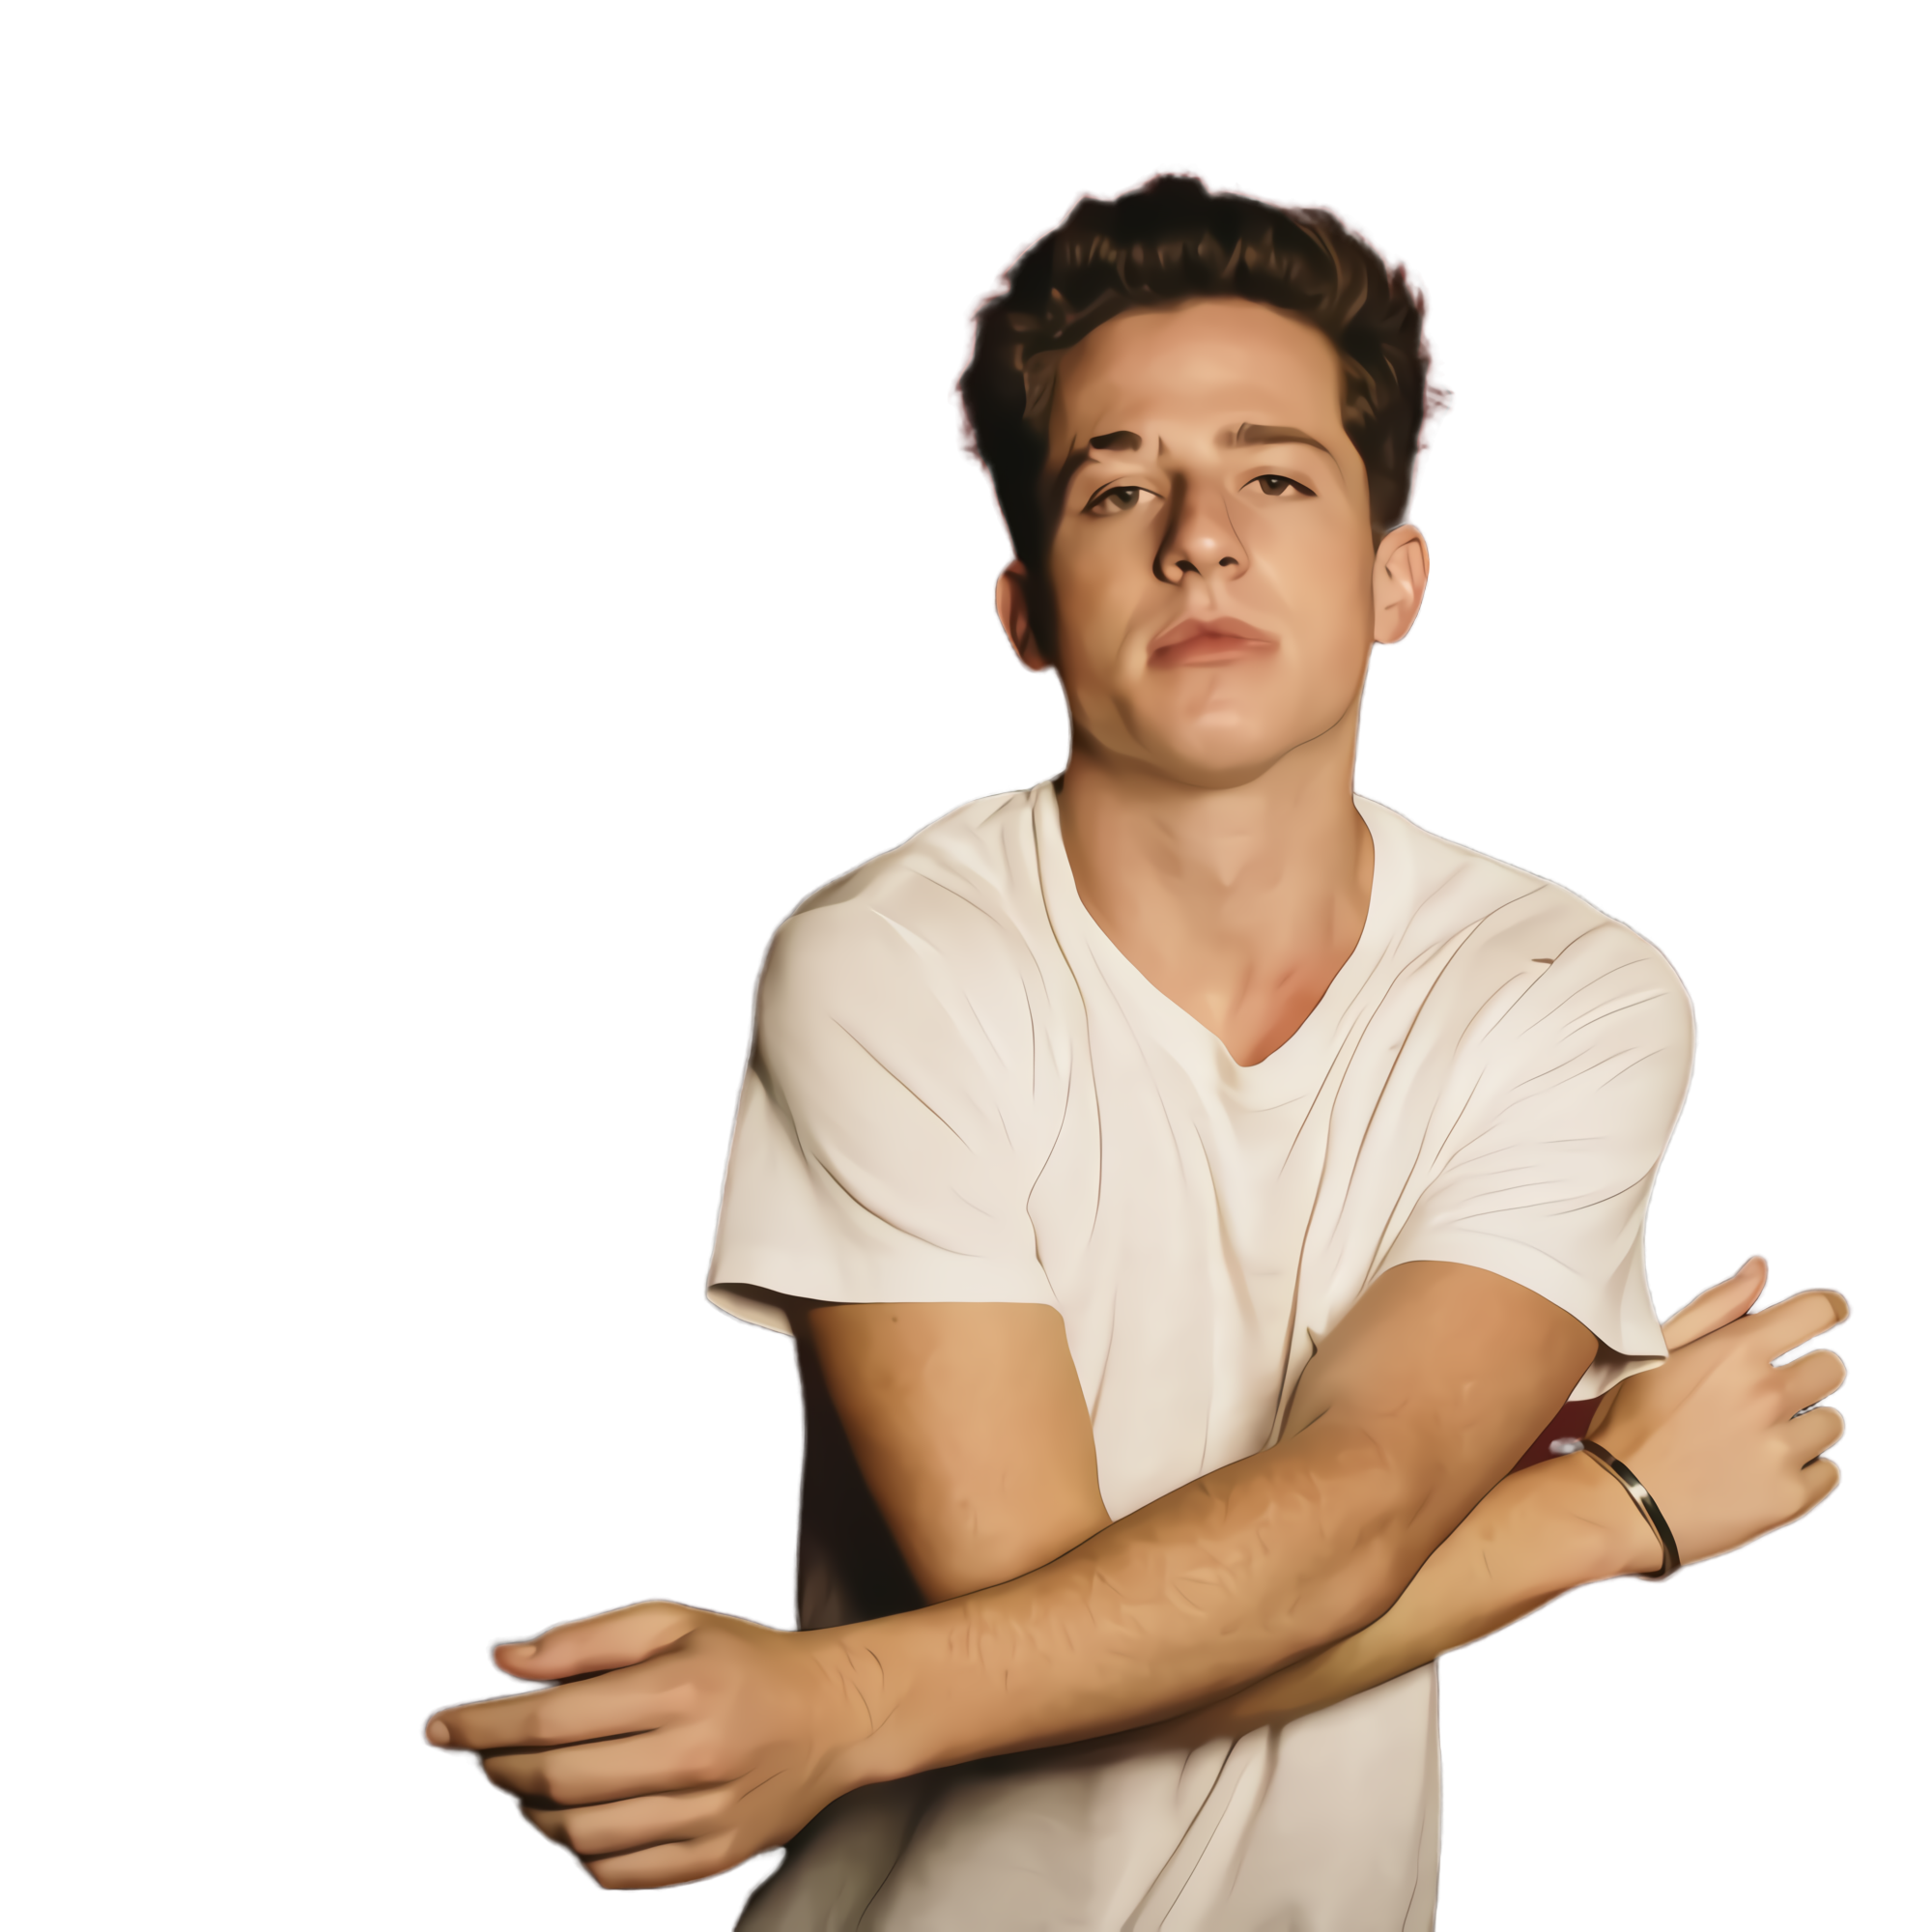 Charlie Puth PNG Image HD